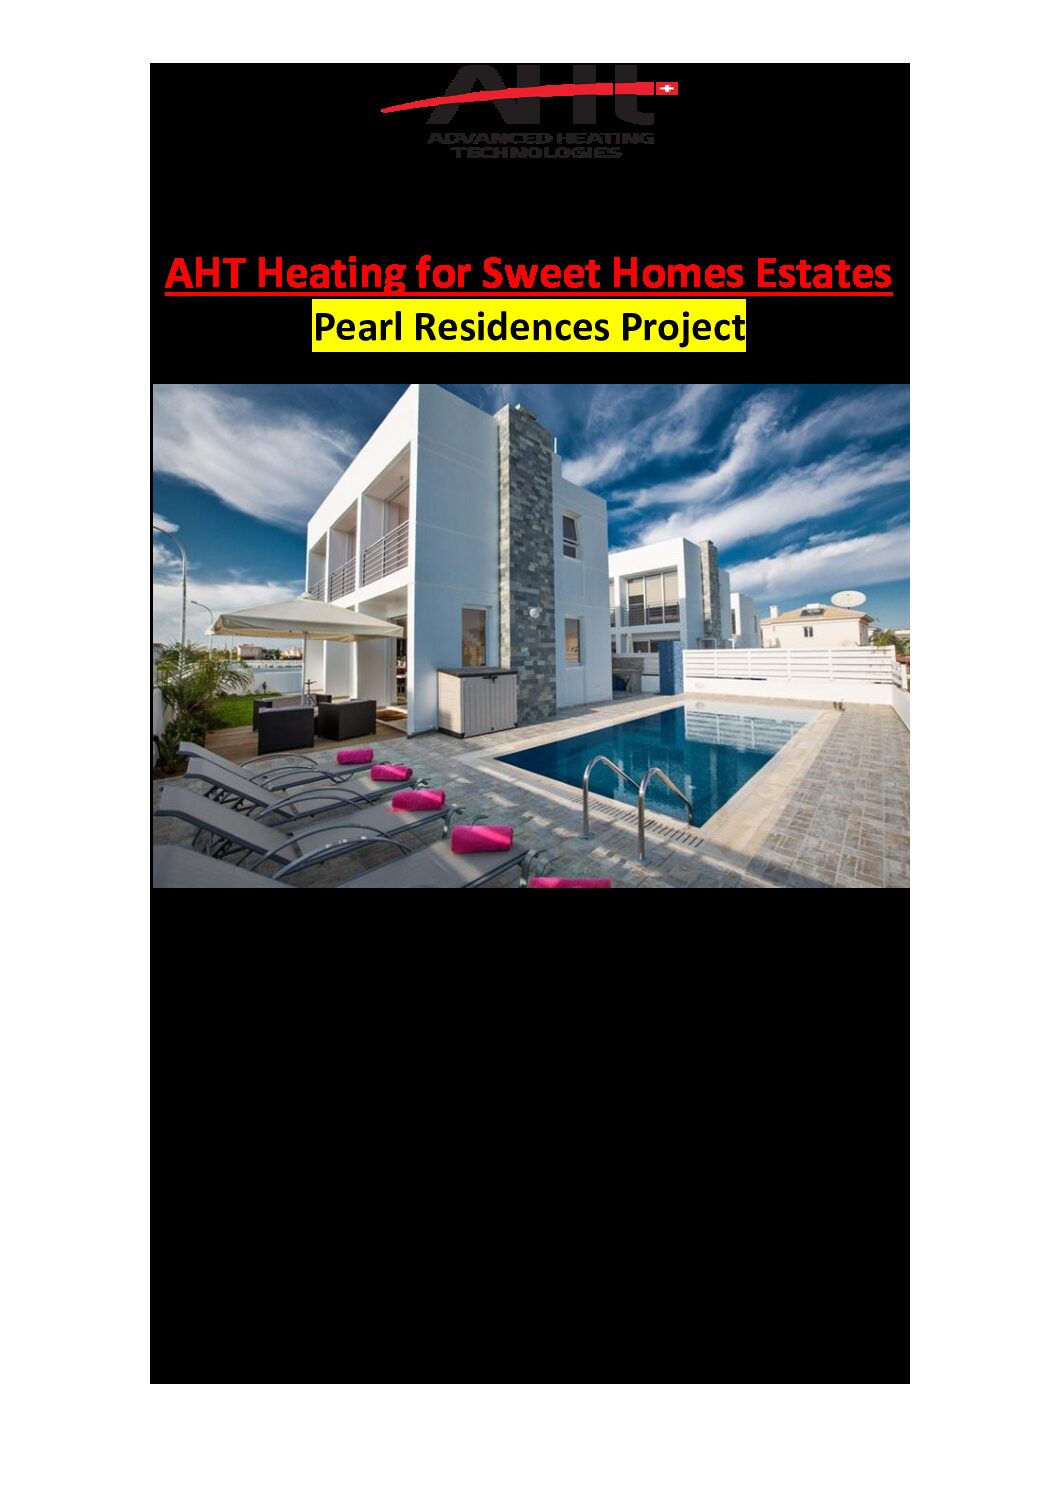 AHT-Heating-Sweet-Homes-Estates-Pearl-Residences-Project-1-pdf